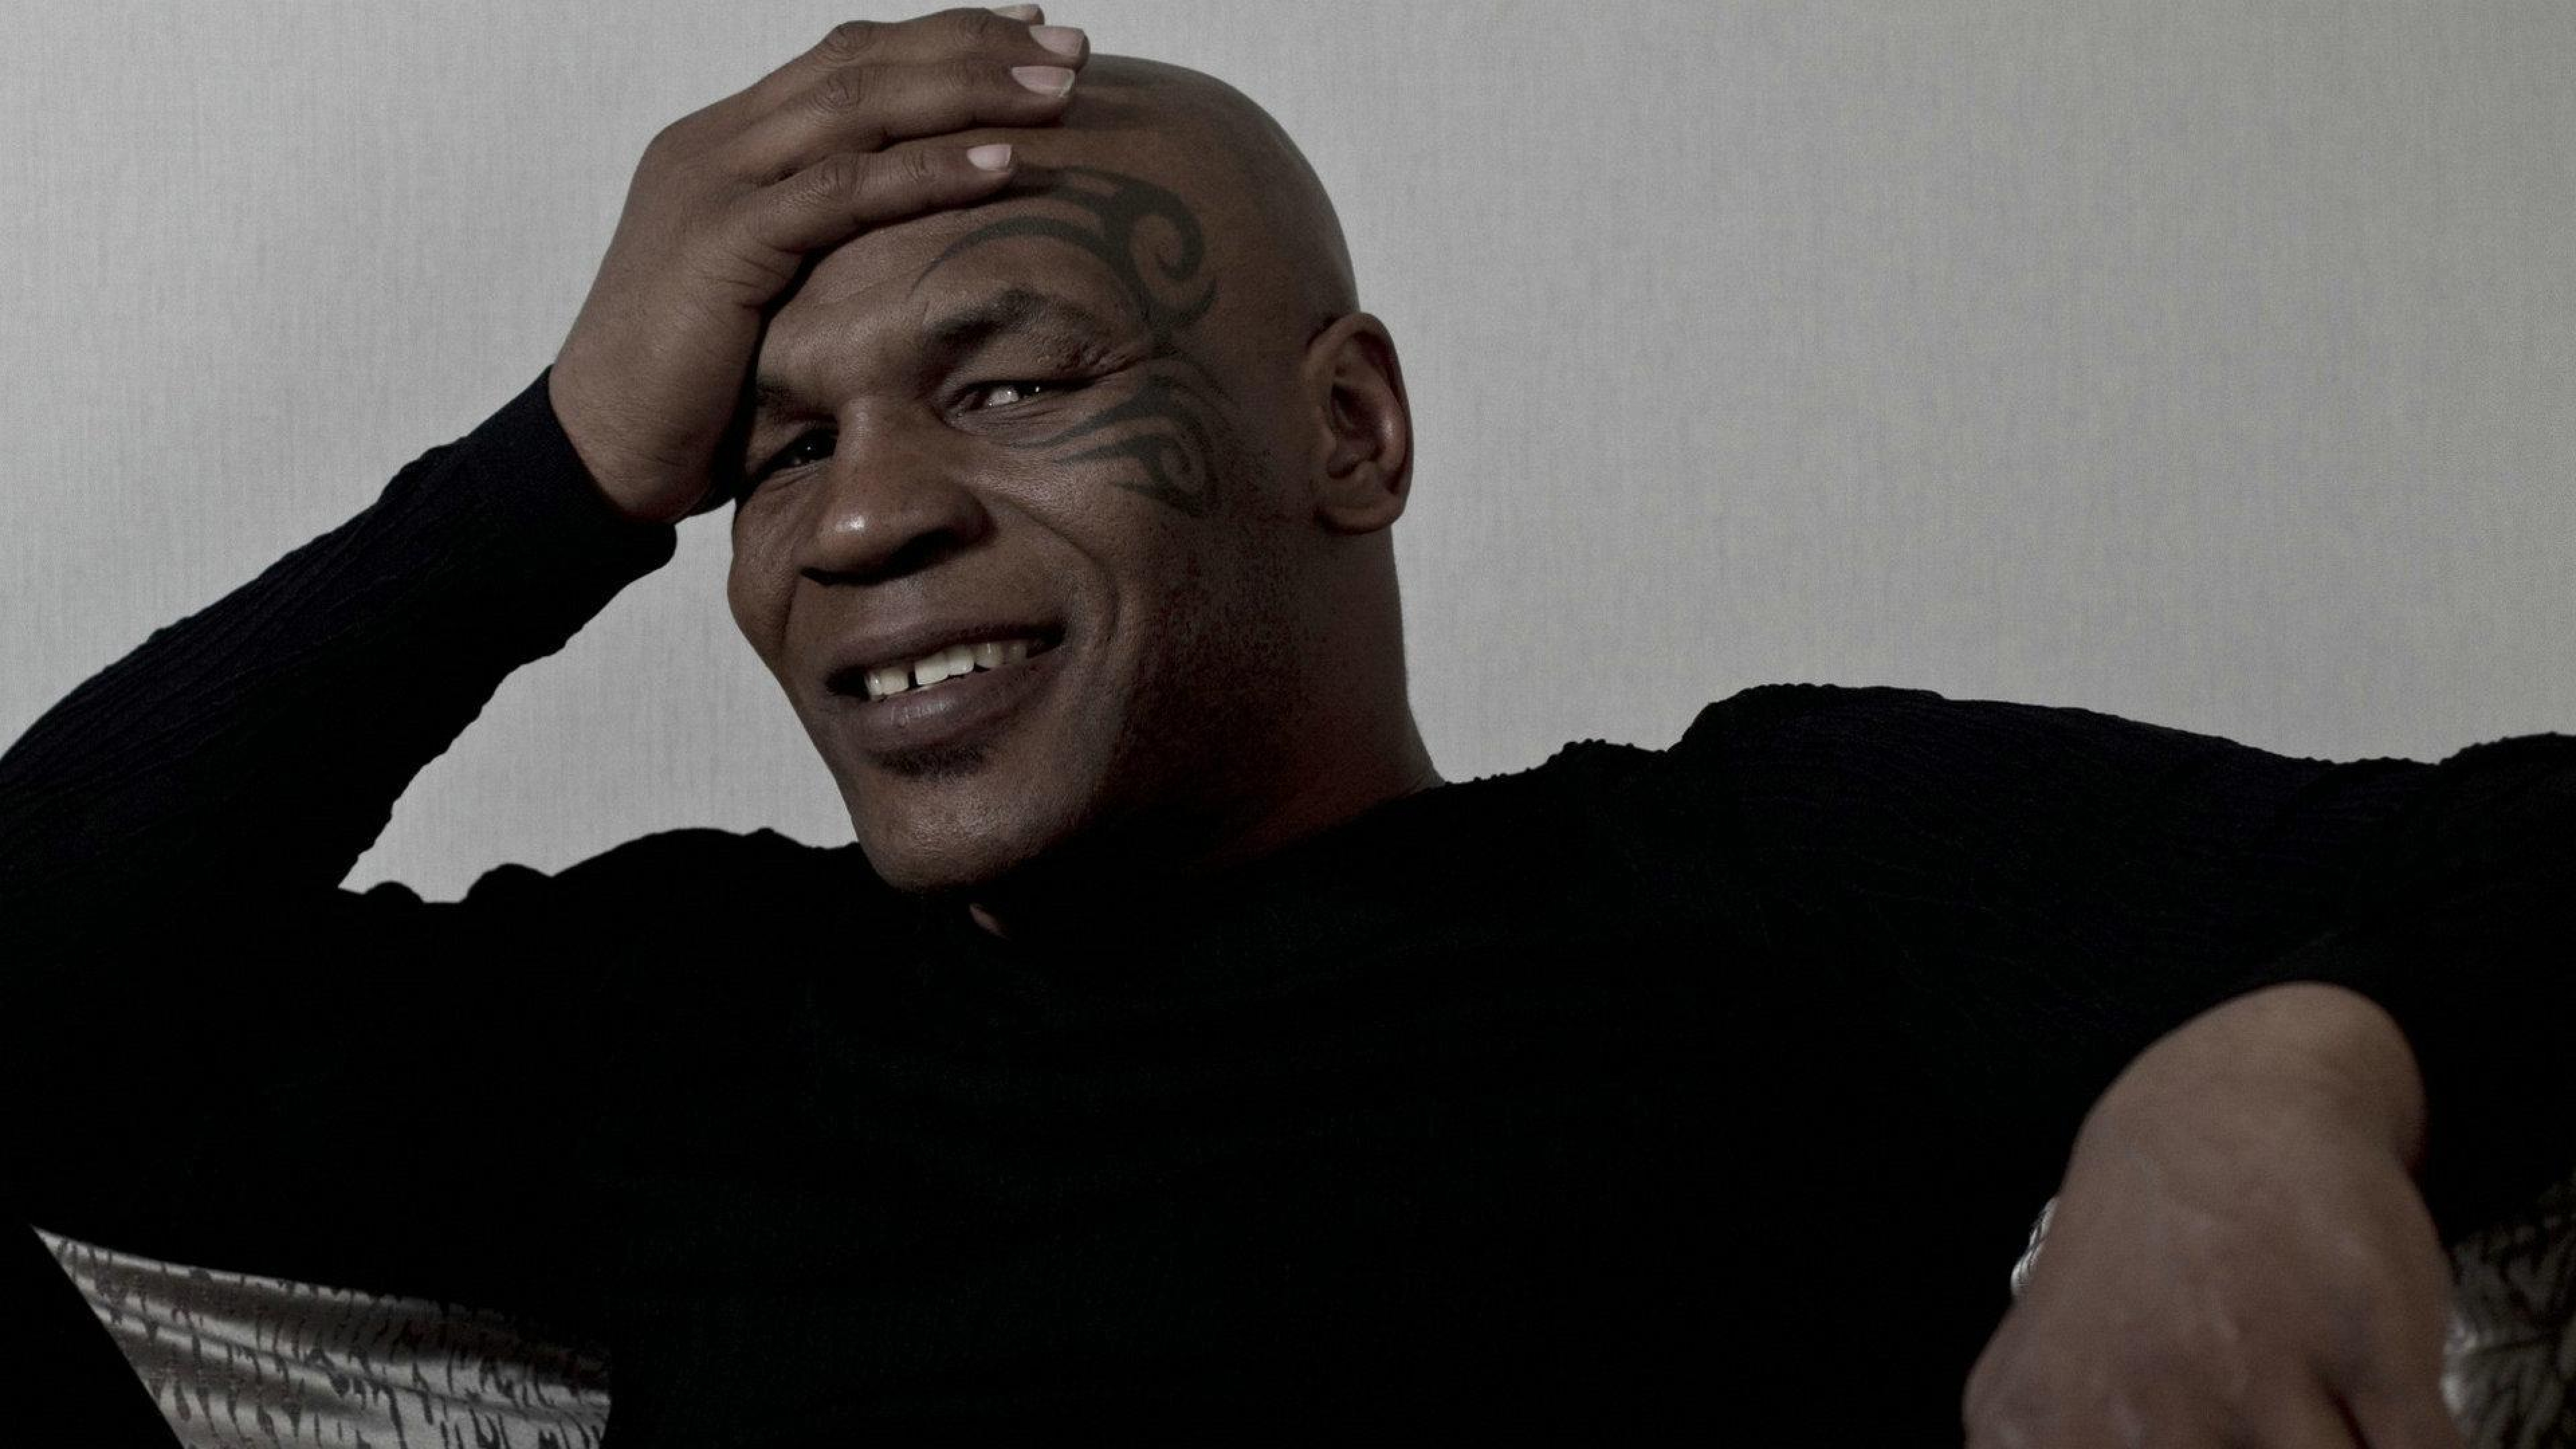 Mike Tyson Wallpaper 4k APK 1 for Android – Download Mike Tyson Wallpaper 4k  APK Latest Version from APKFab.com